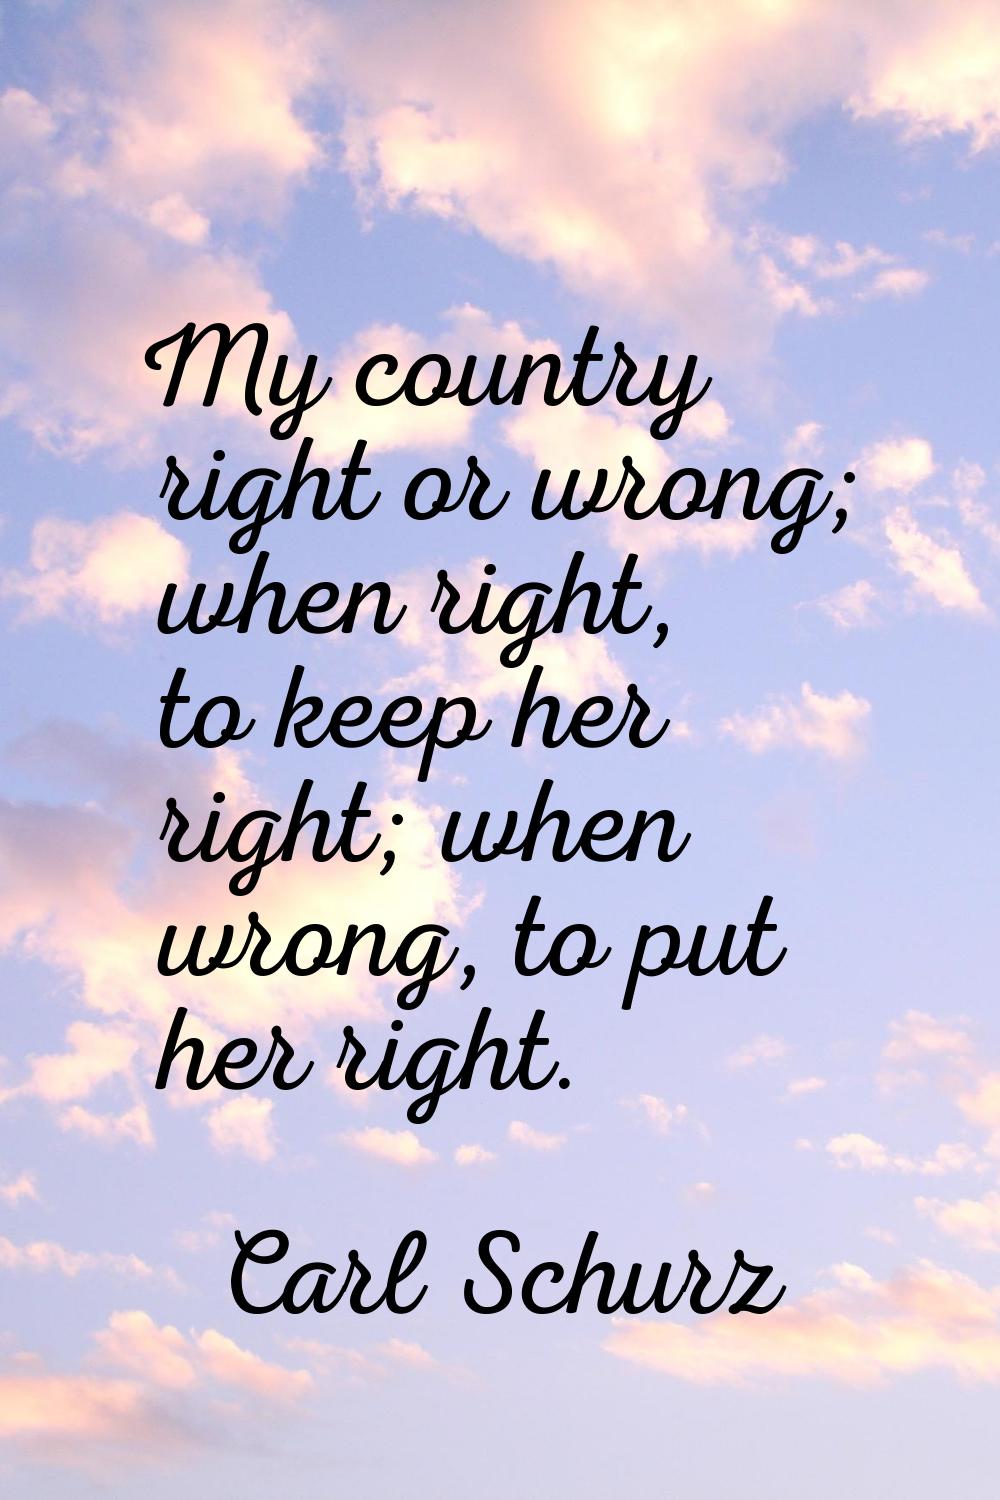 My country right or wrong; when right, to keep her right; when wrong, to put her right.